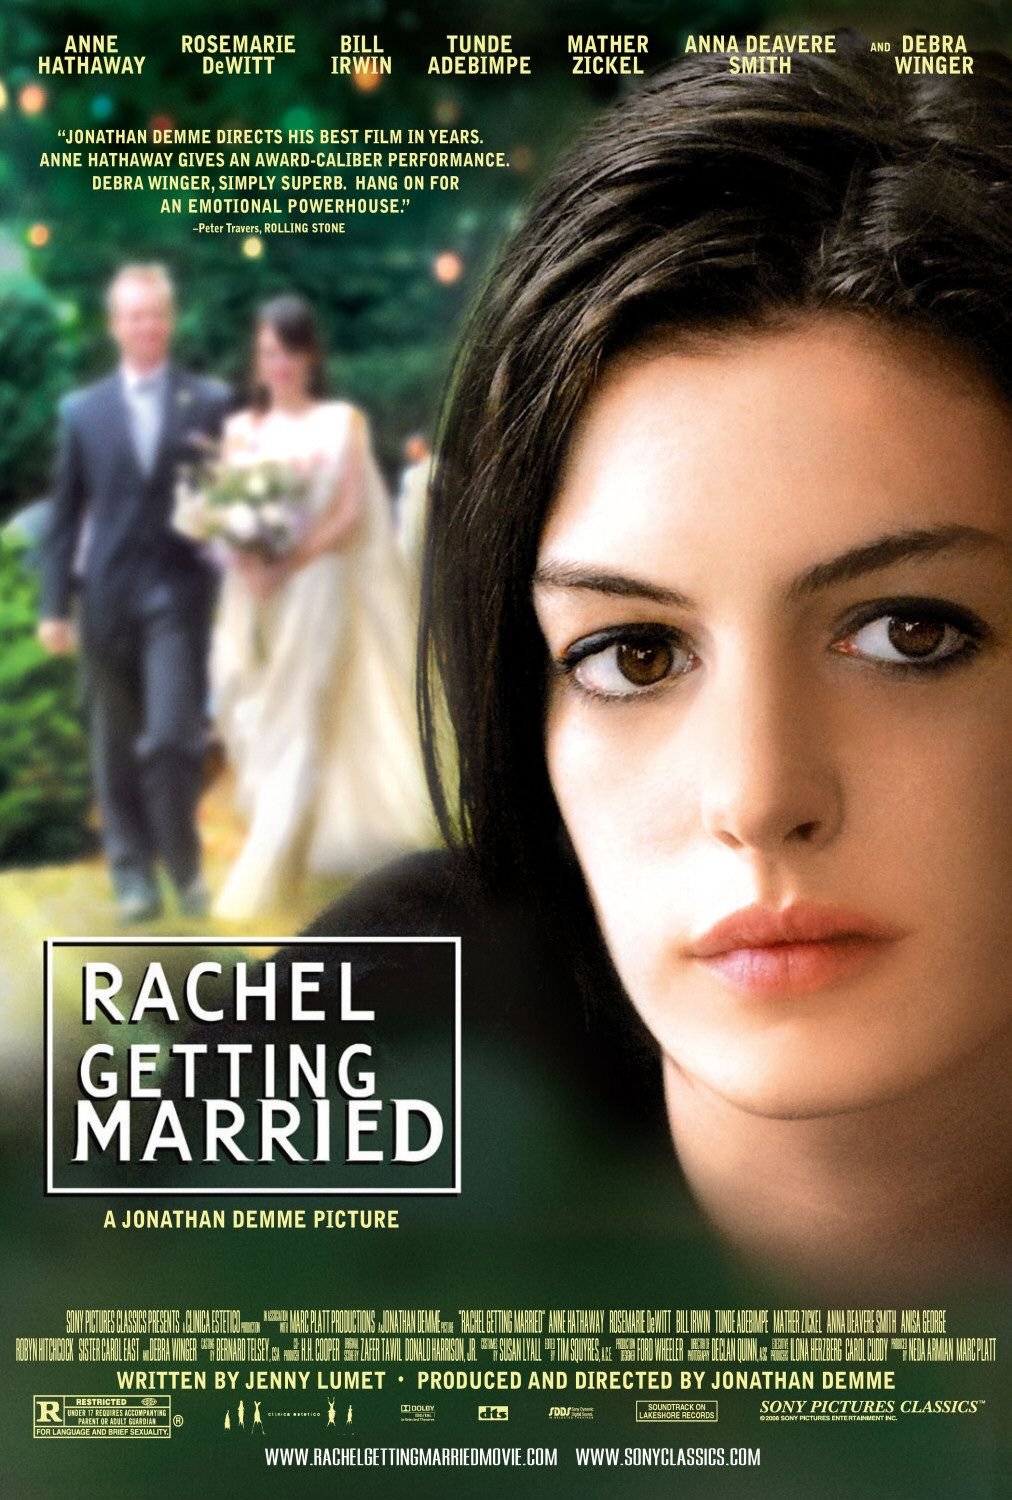 Poster of the movie Rachel Getting Married